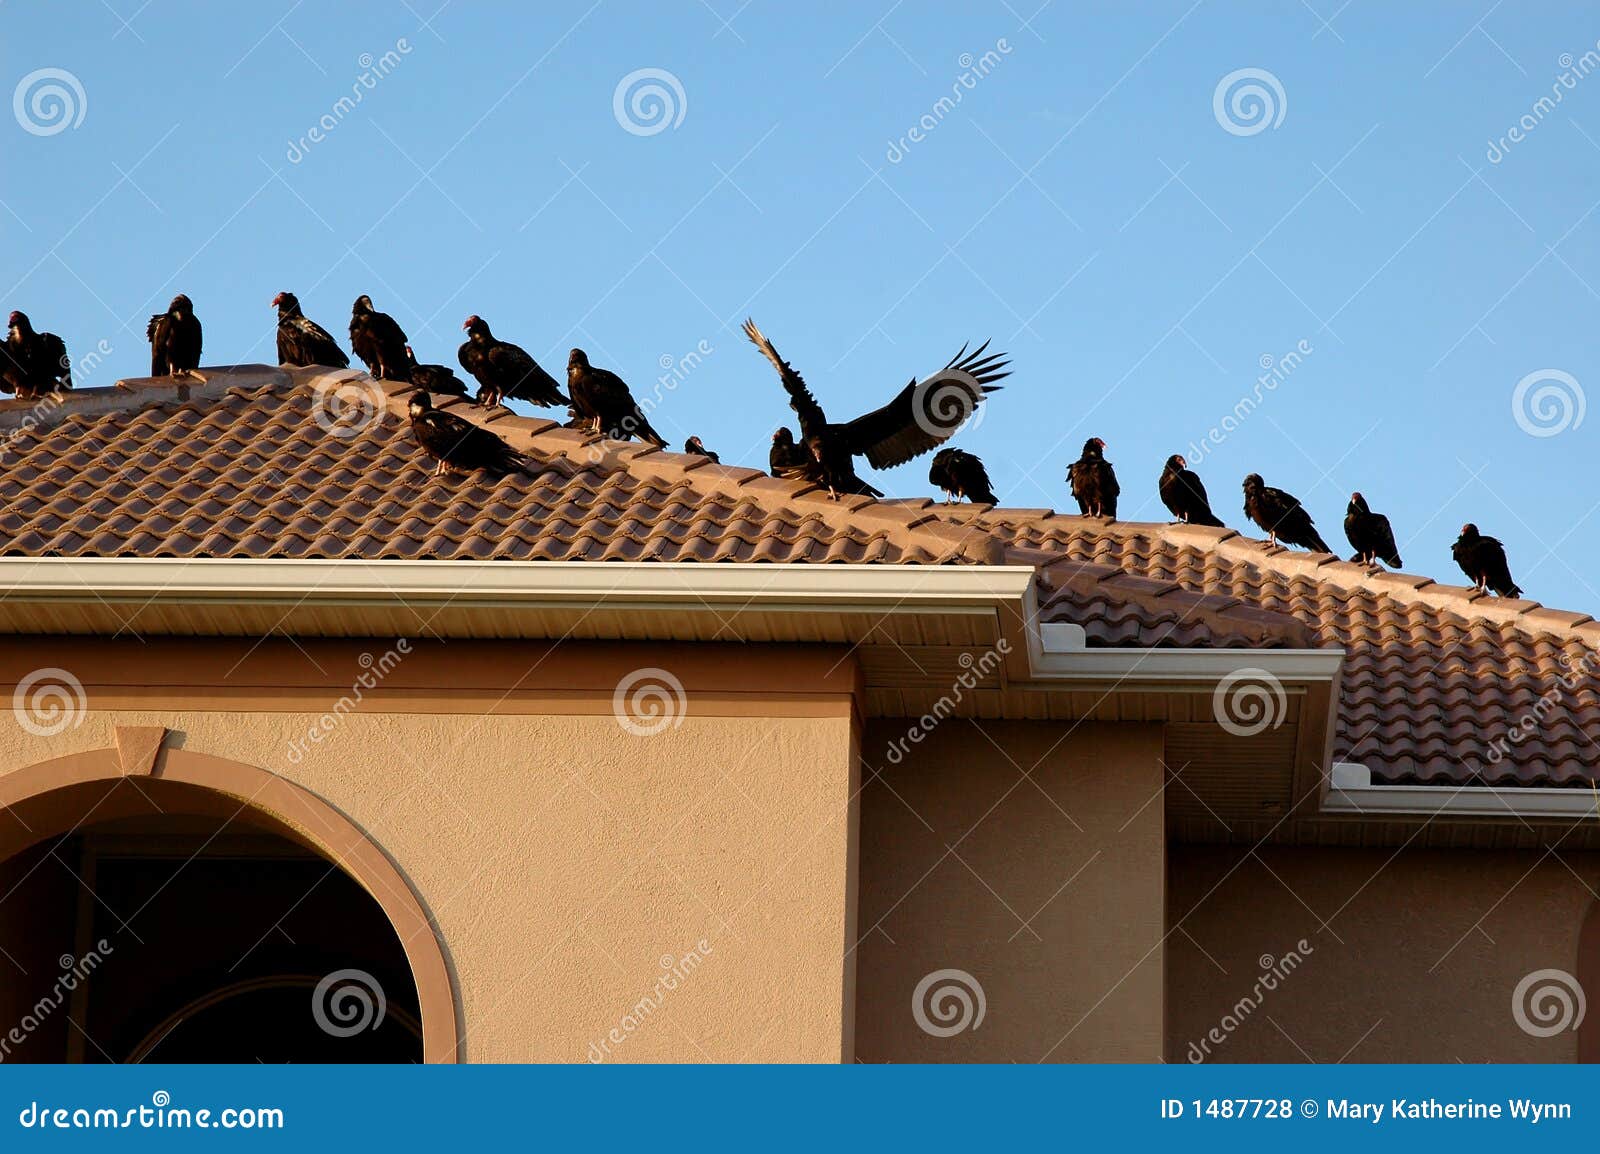 vultures on rooftop